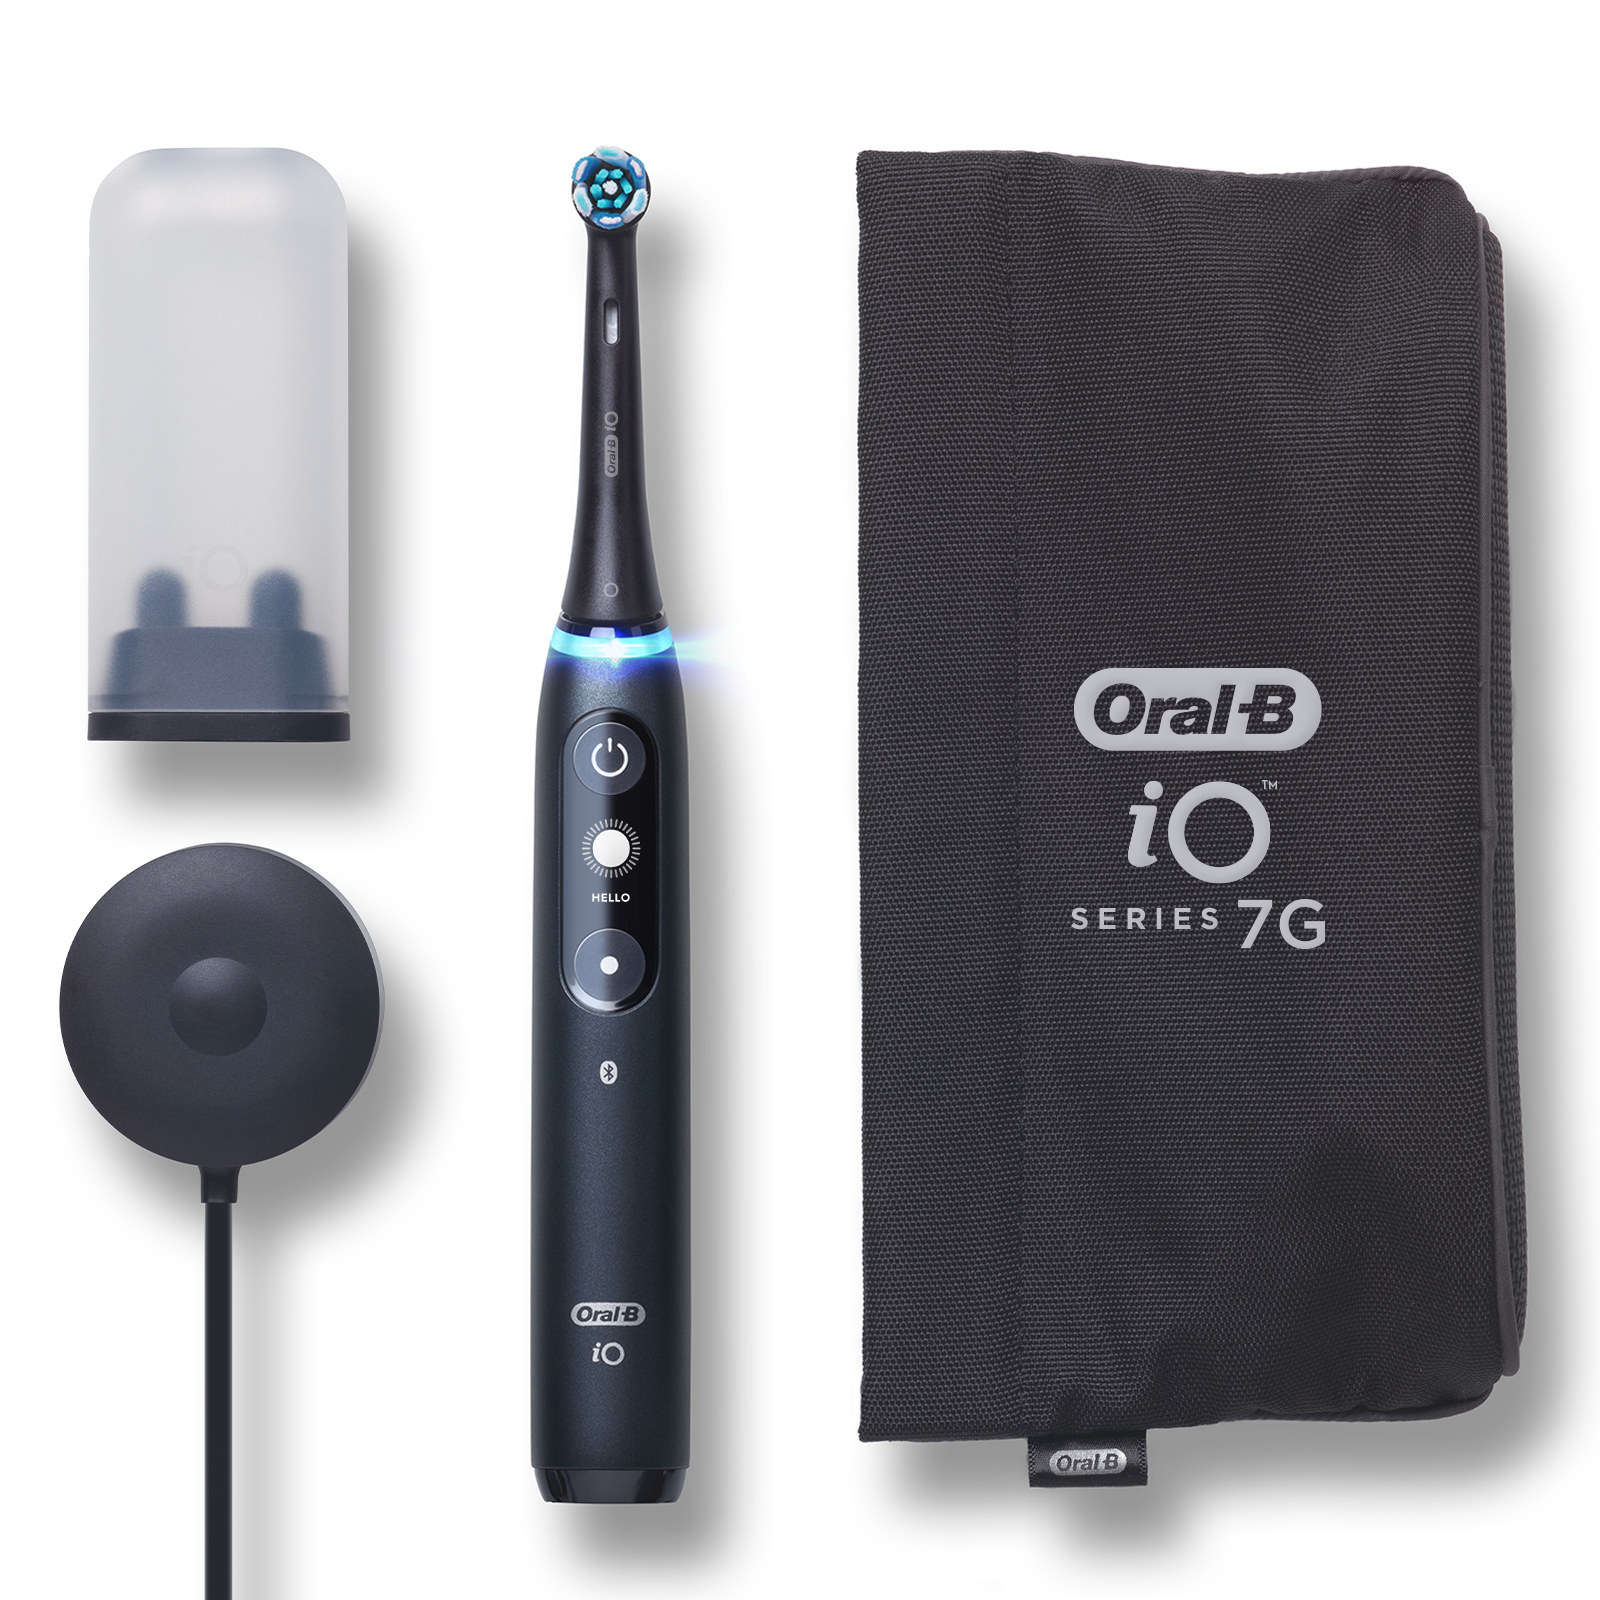 The black onyx electric toothbrush